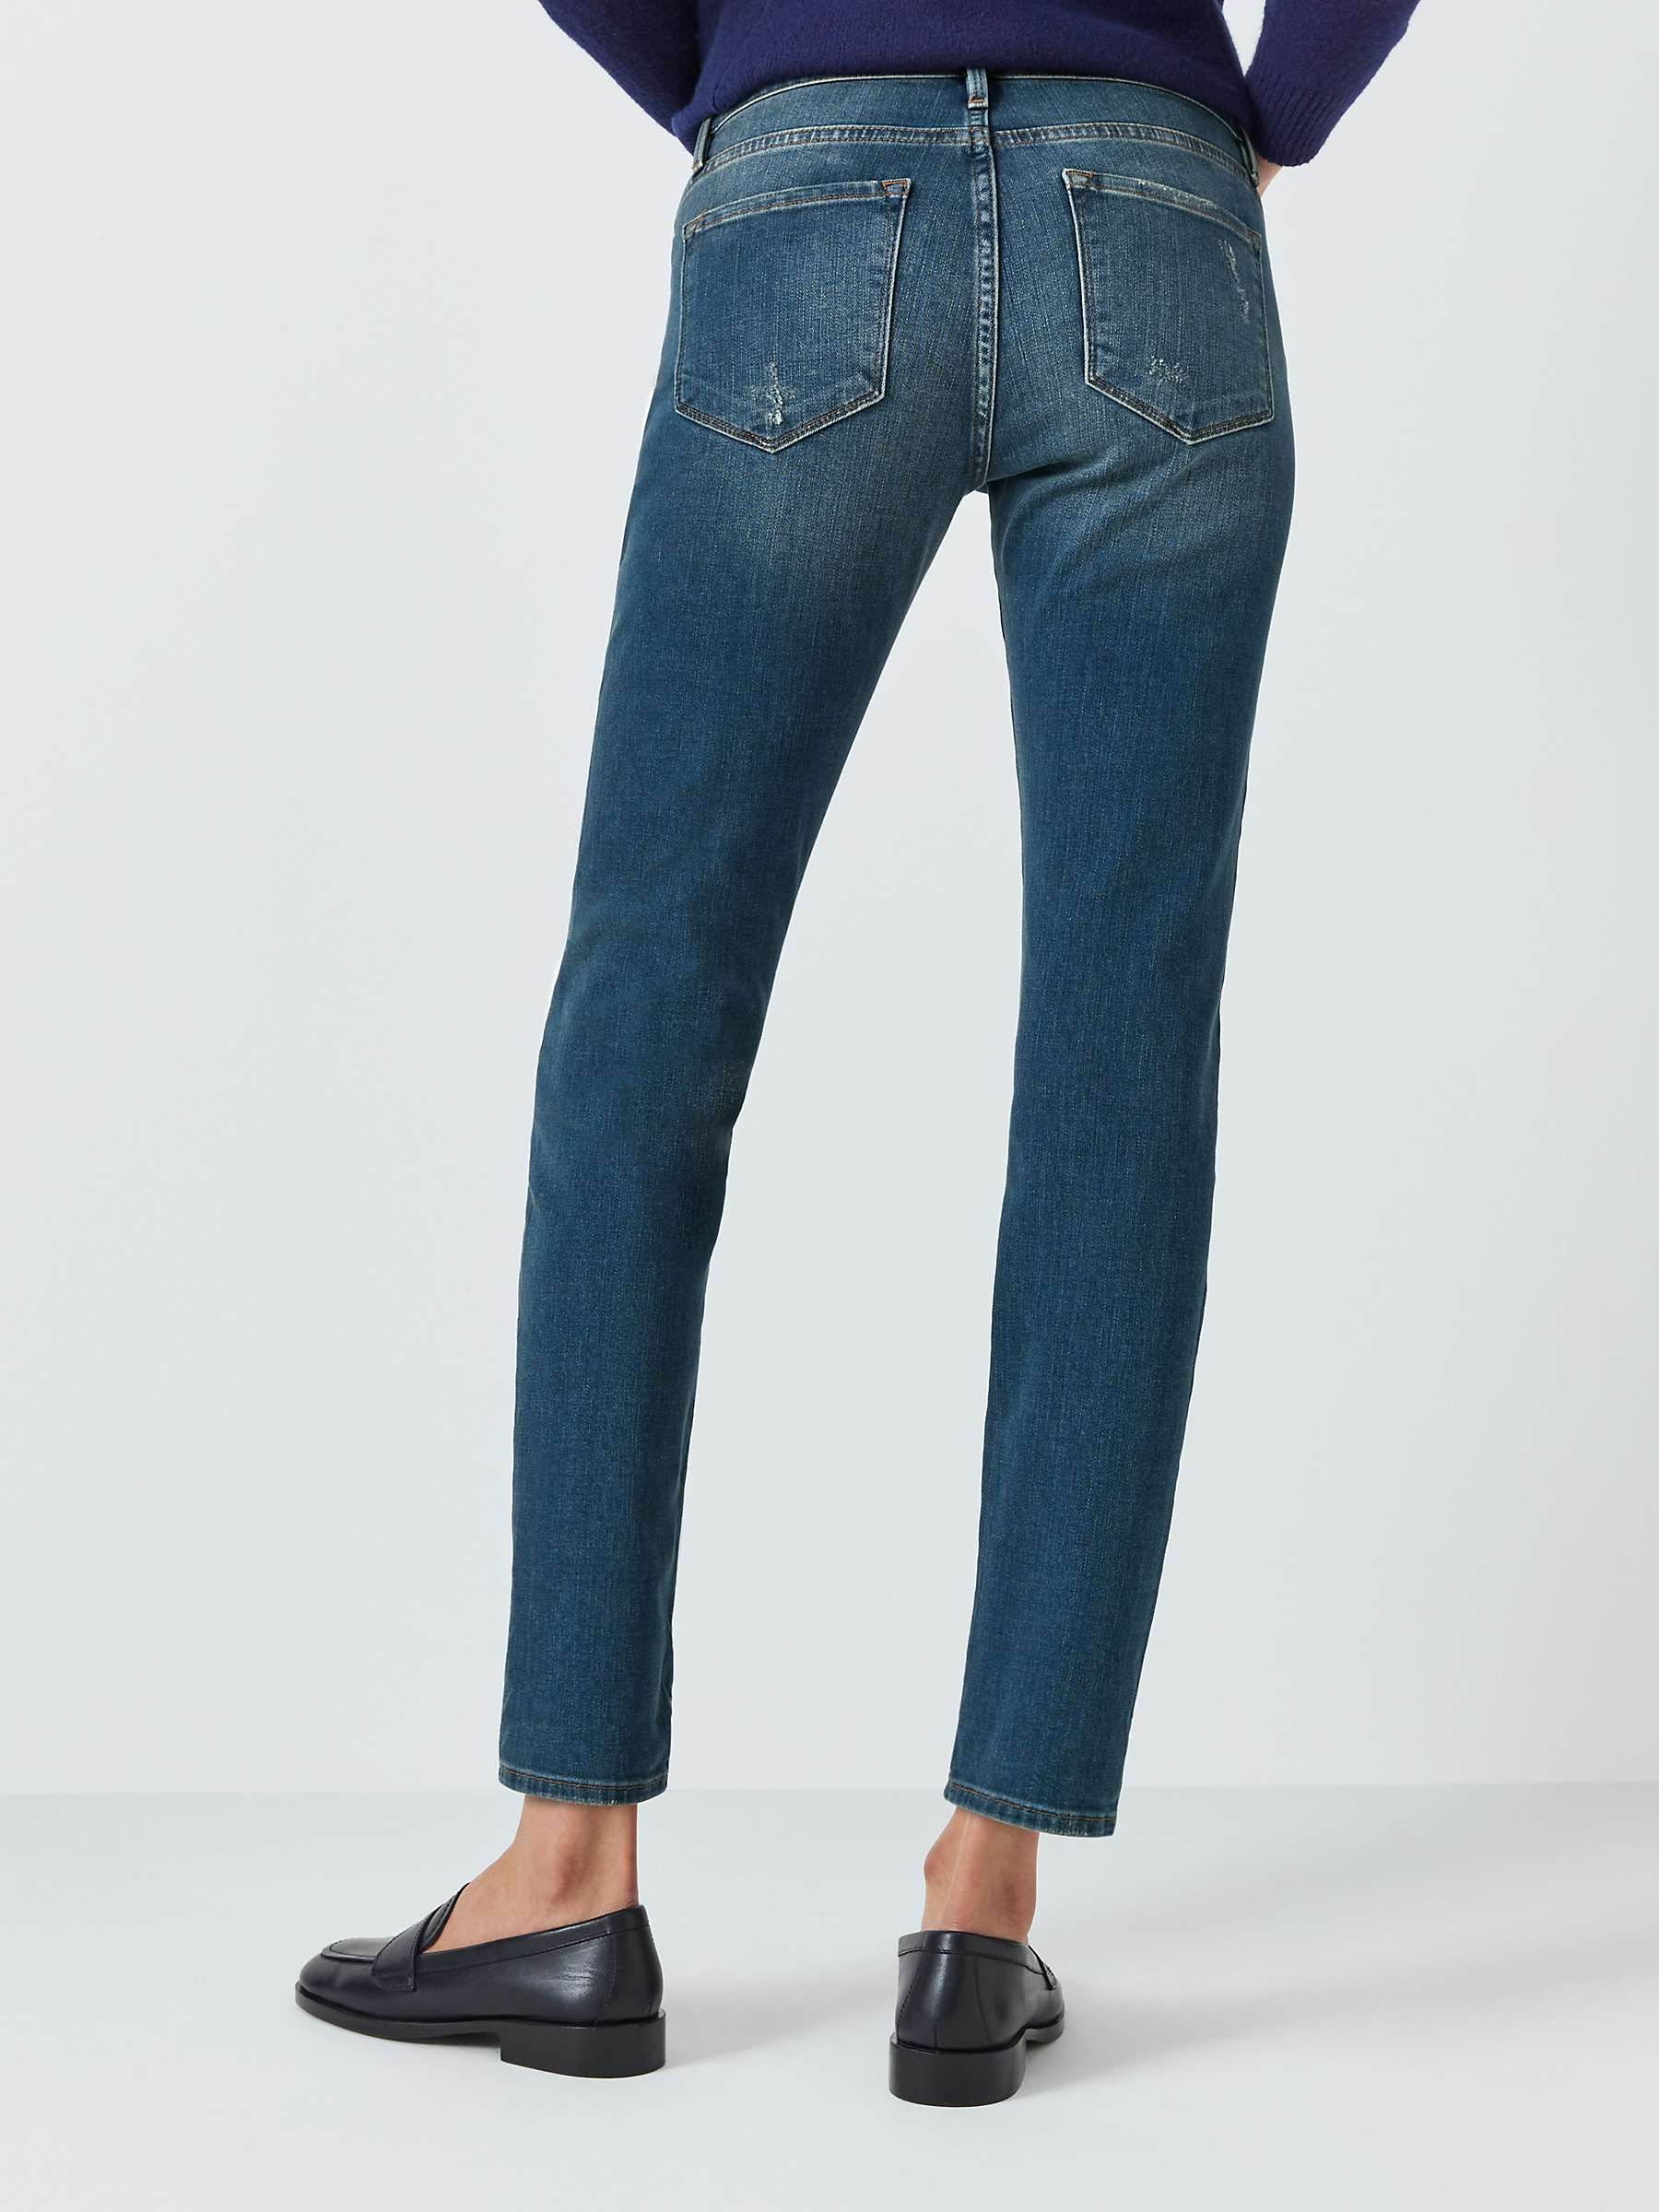 Buy FRAME Le Garcon Mid Rise Slouchy Jeans, Azure Online at johnlewis.com